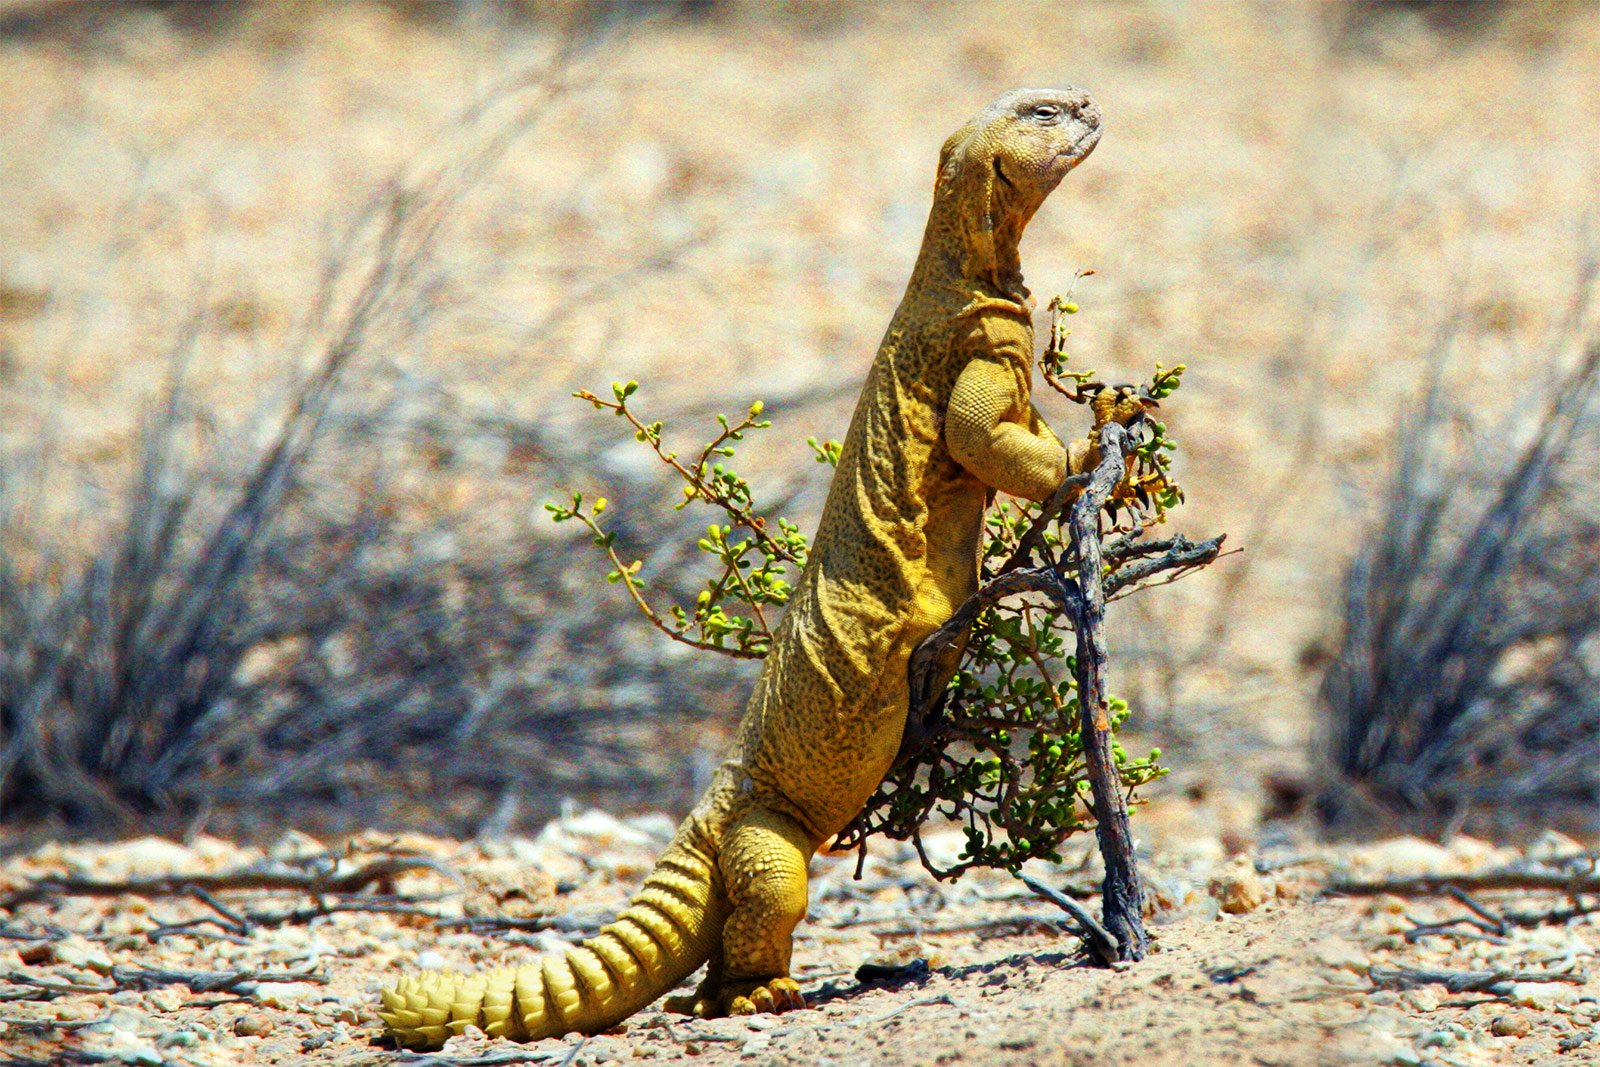 How to see uromastyx in Dubai